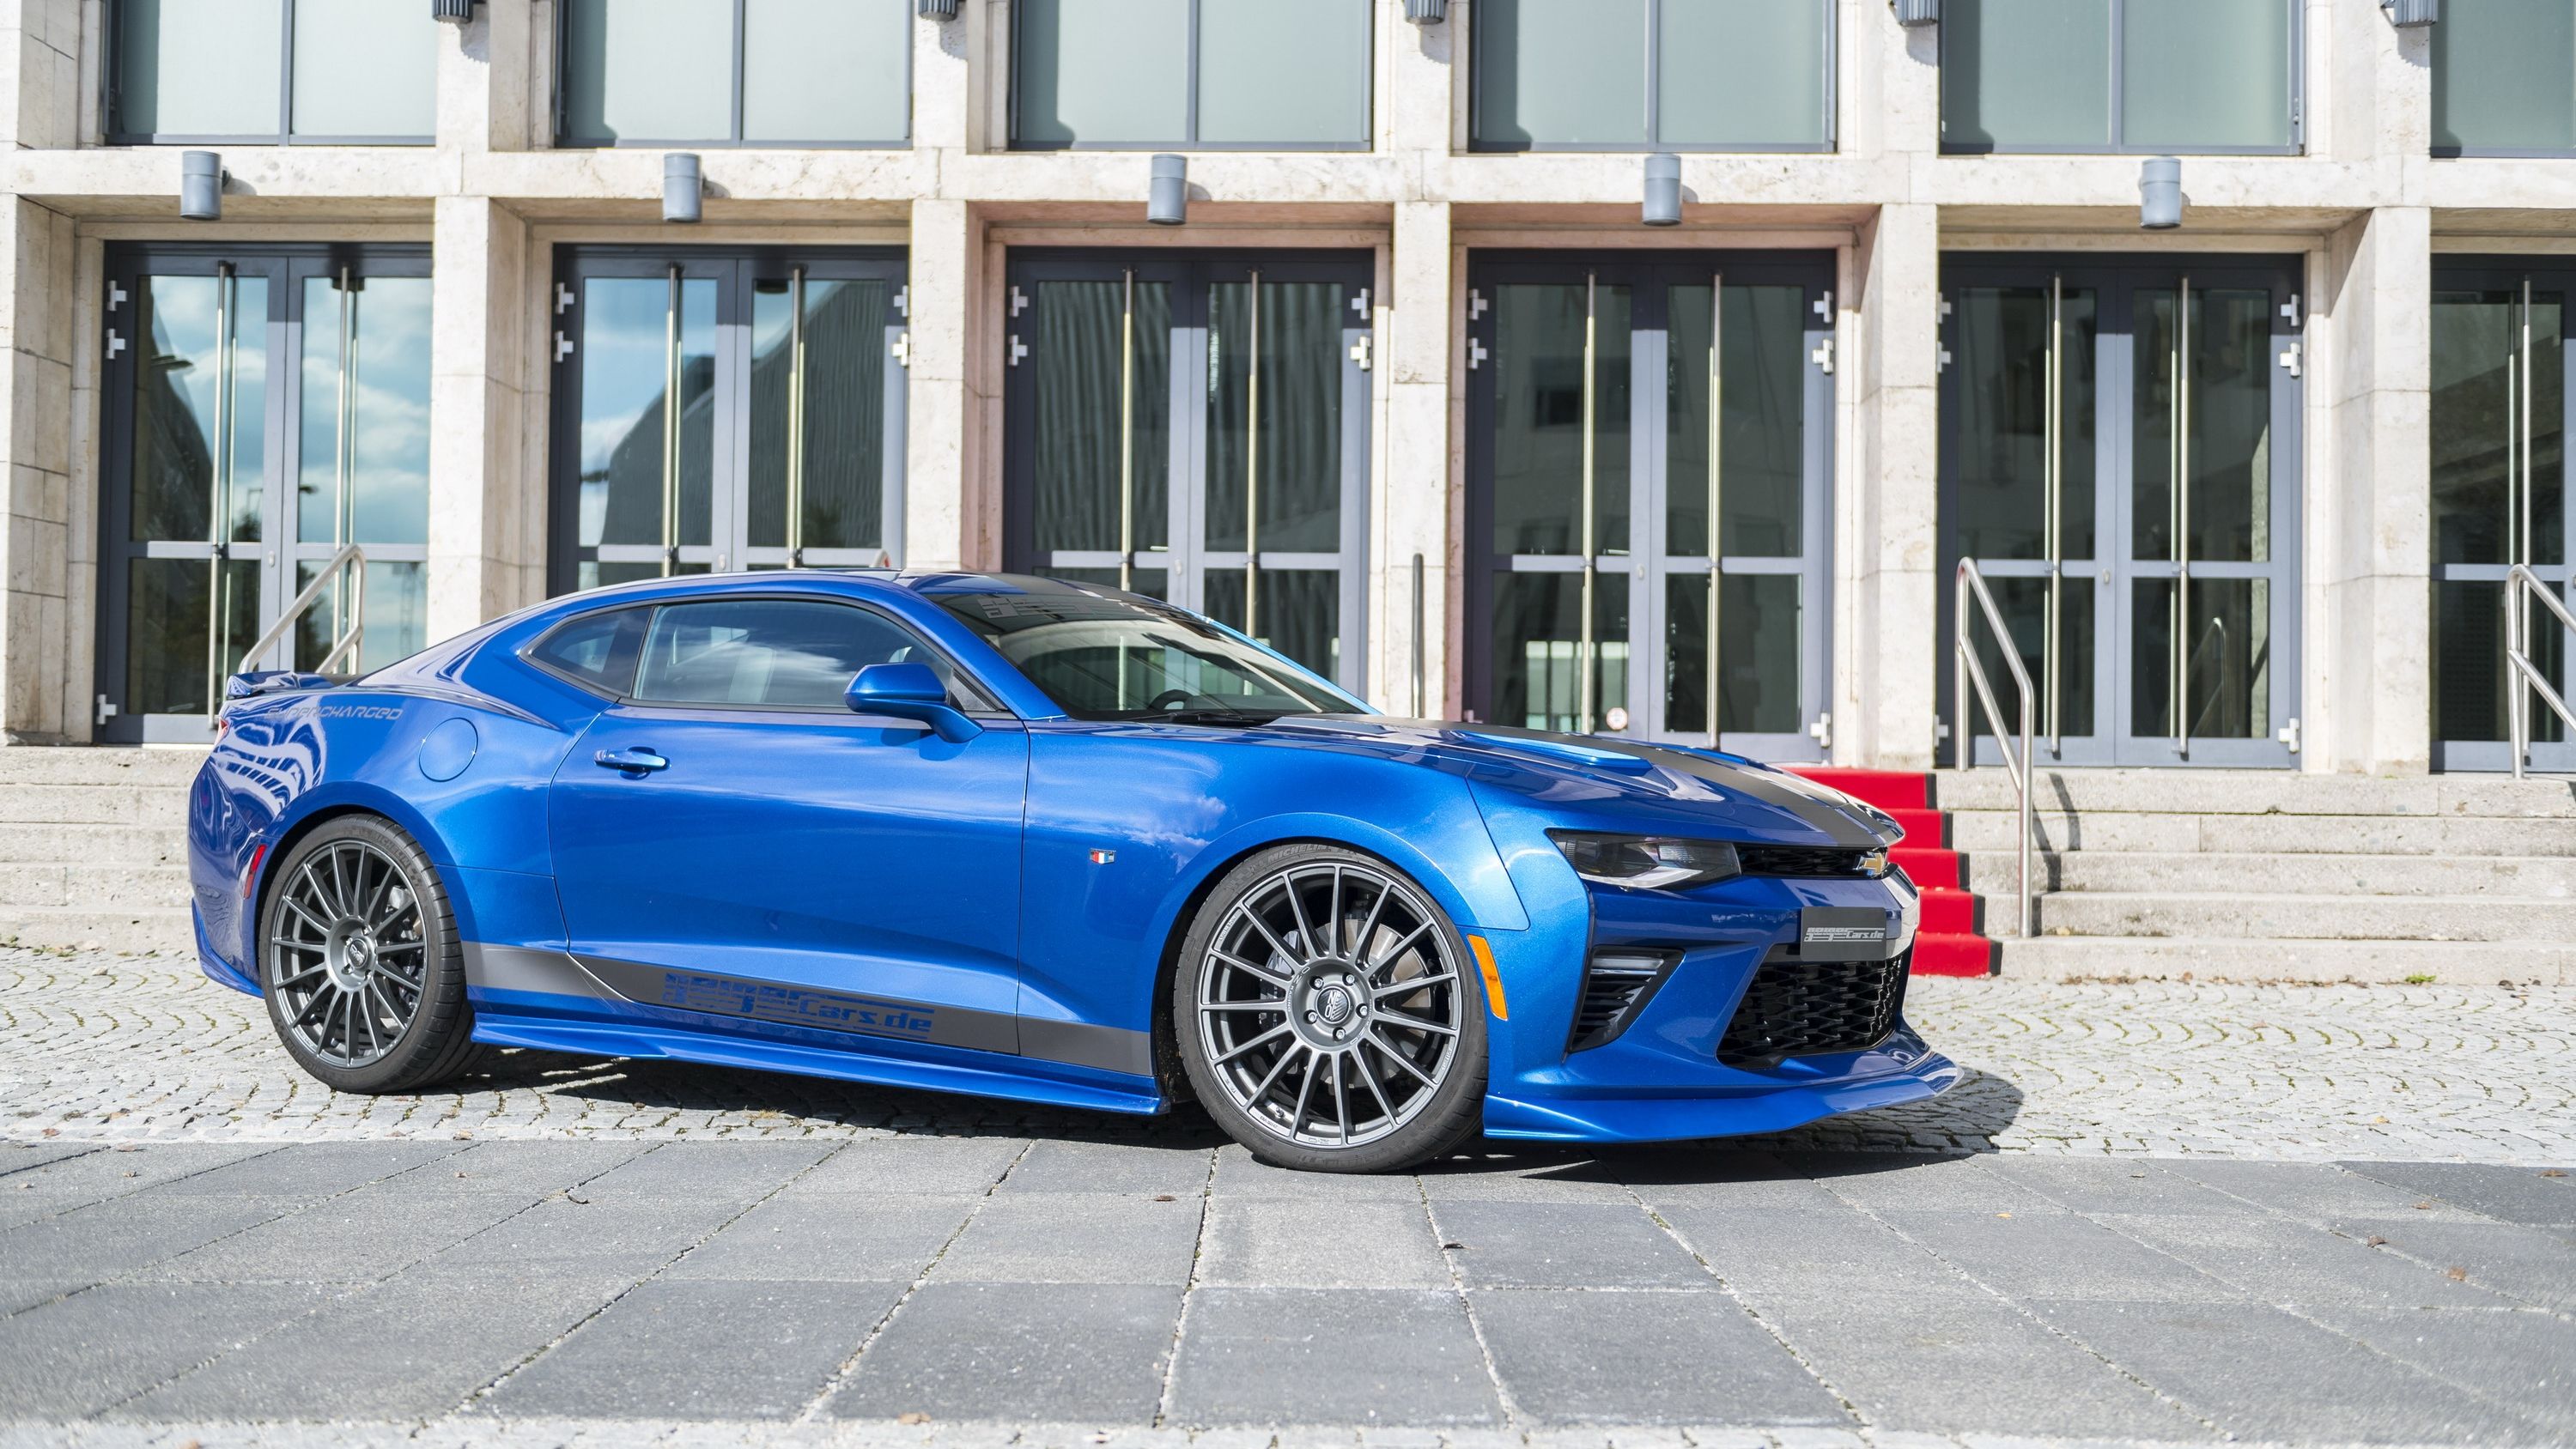 2016 Chevrolet Camaro Supercharged 630 by Geiger Cars